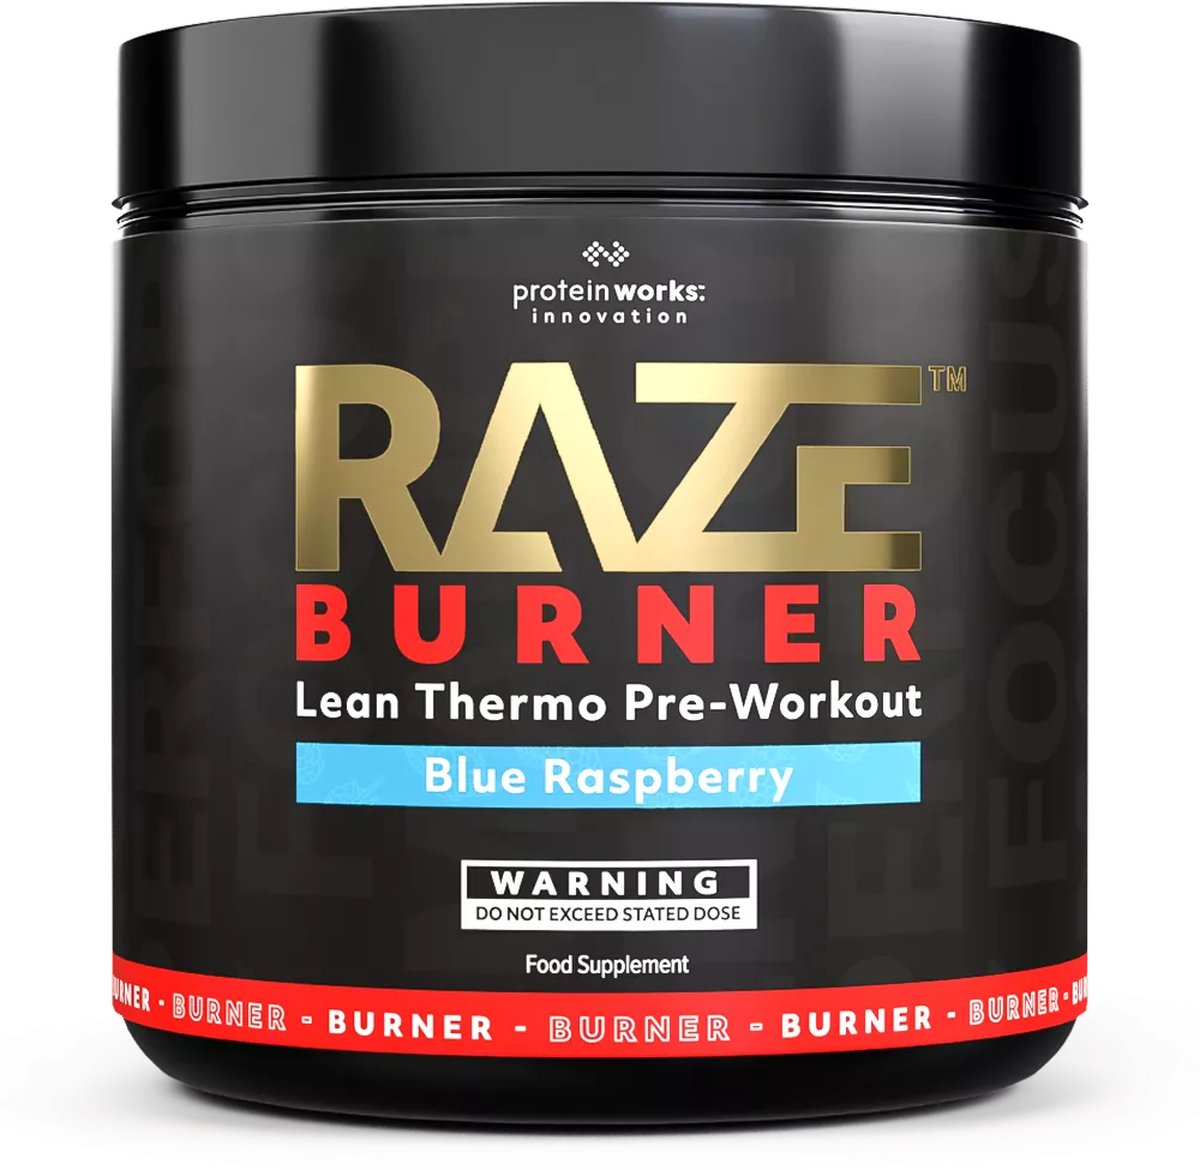 The Protein Works - Raze Burner - Pre-workout - Tropical Storm